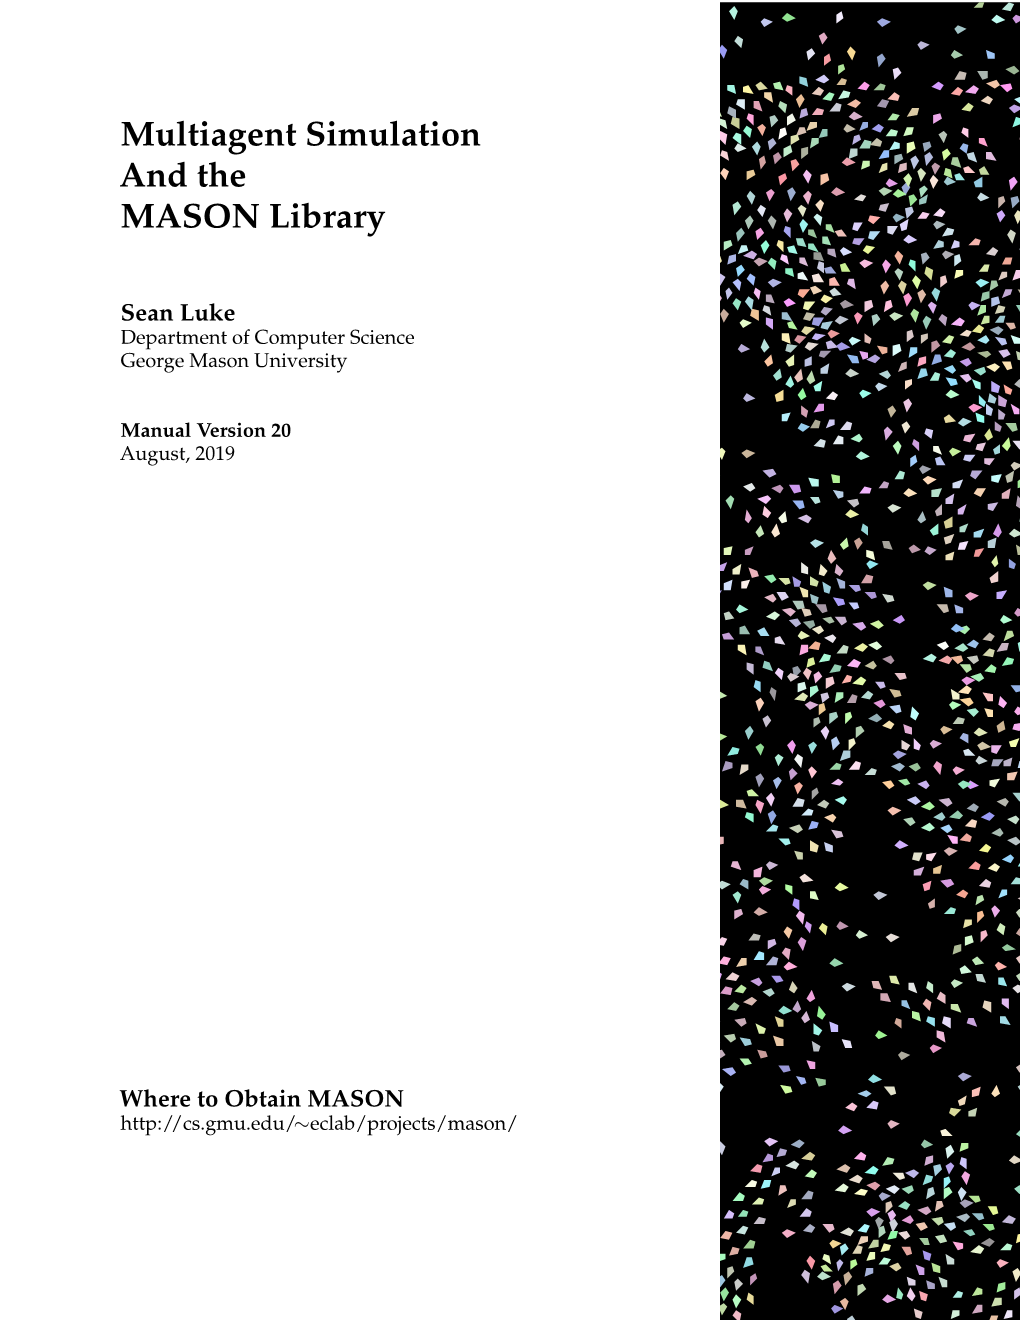 Multiagent Simulation and the MASON Library